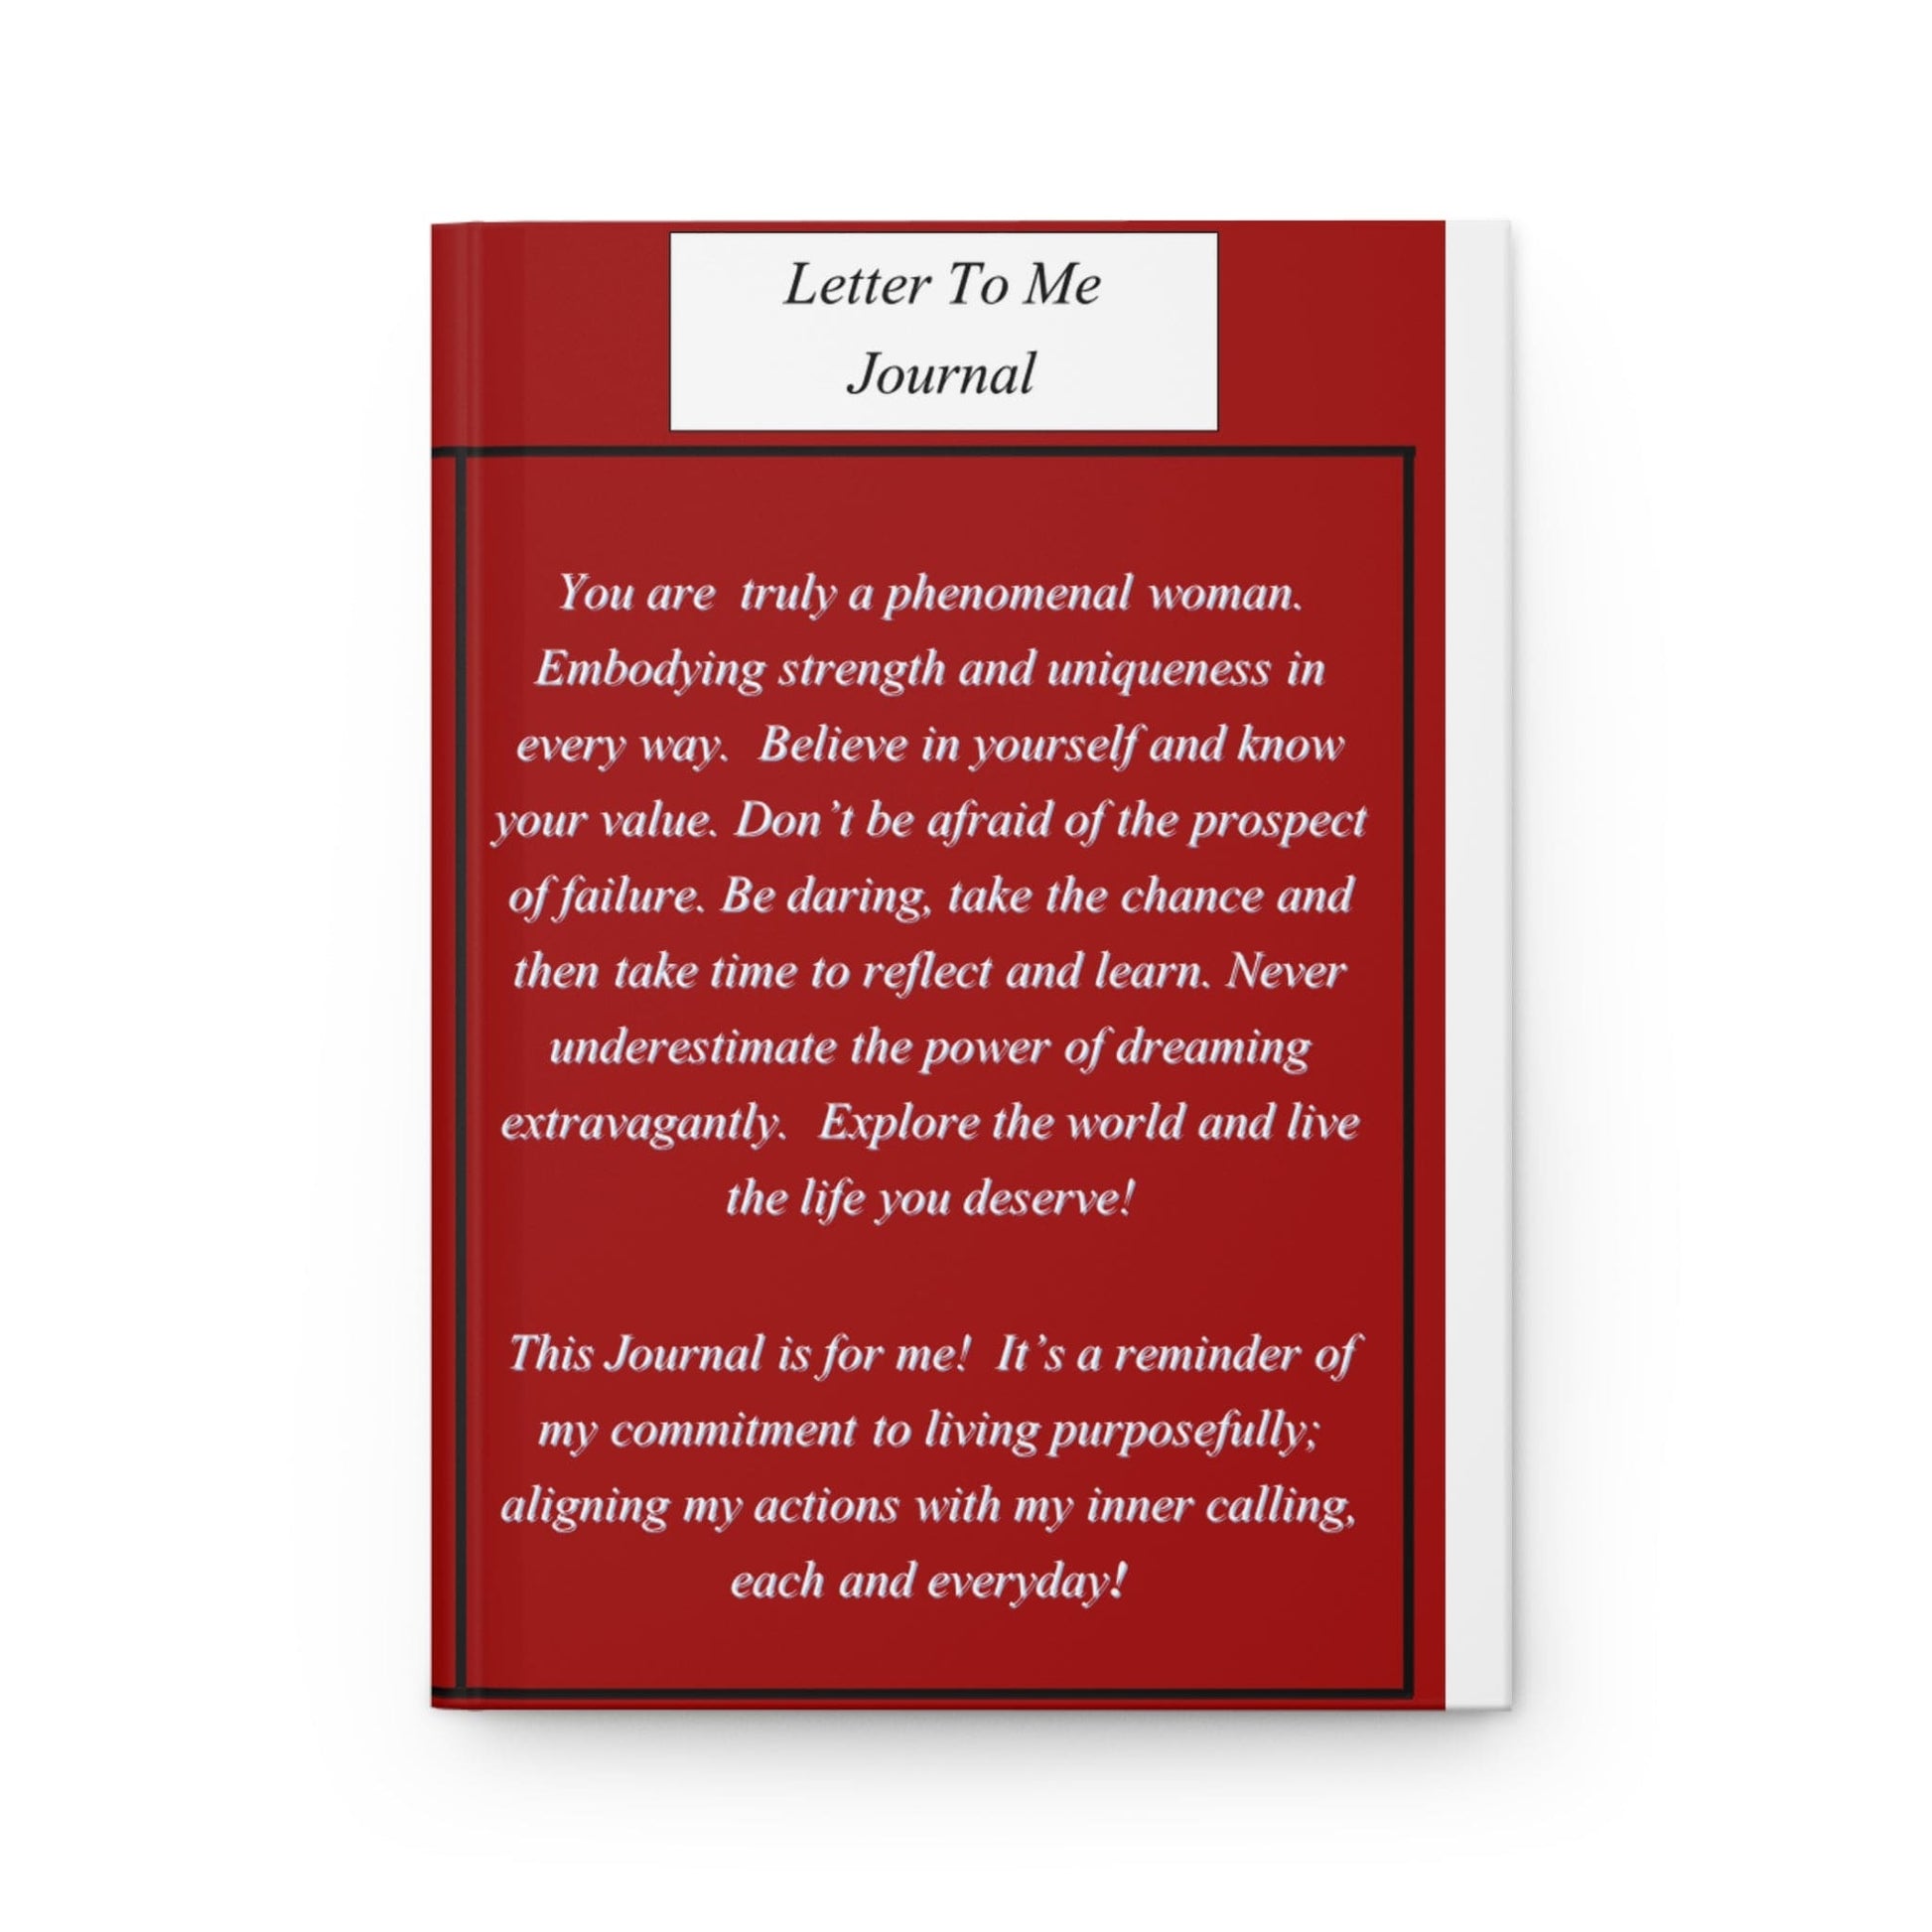 Personalized Journal: Capture Memories and Express Yourself with Customized Journaling. Letter To Me Journal